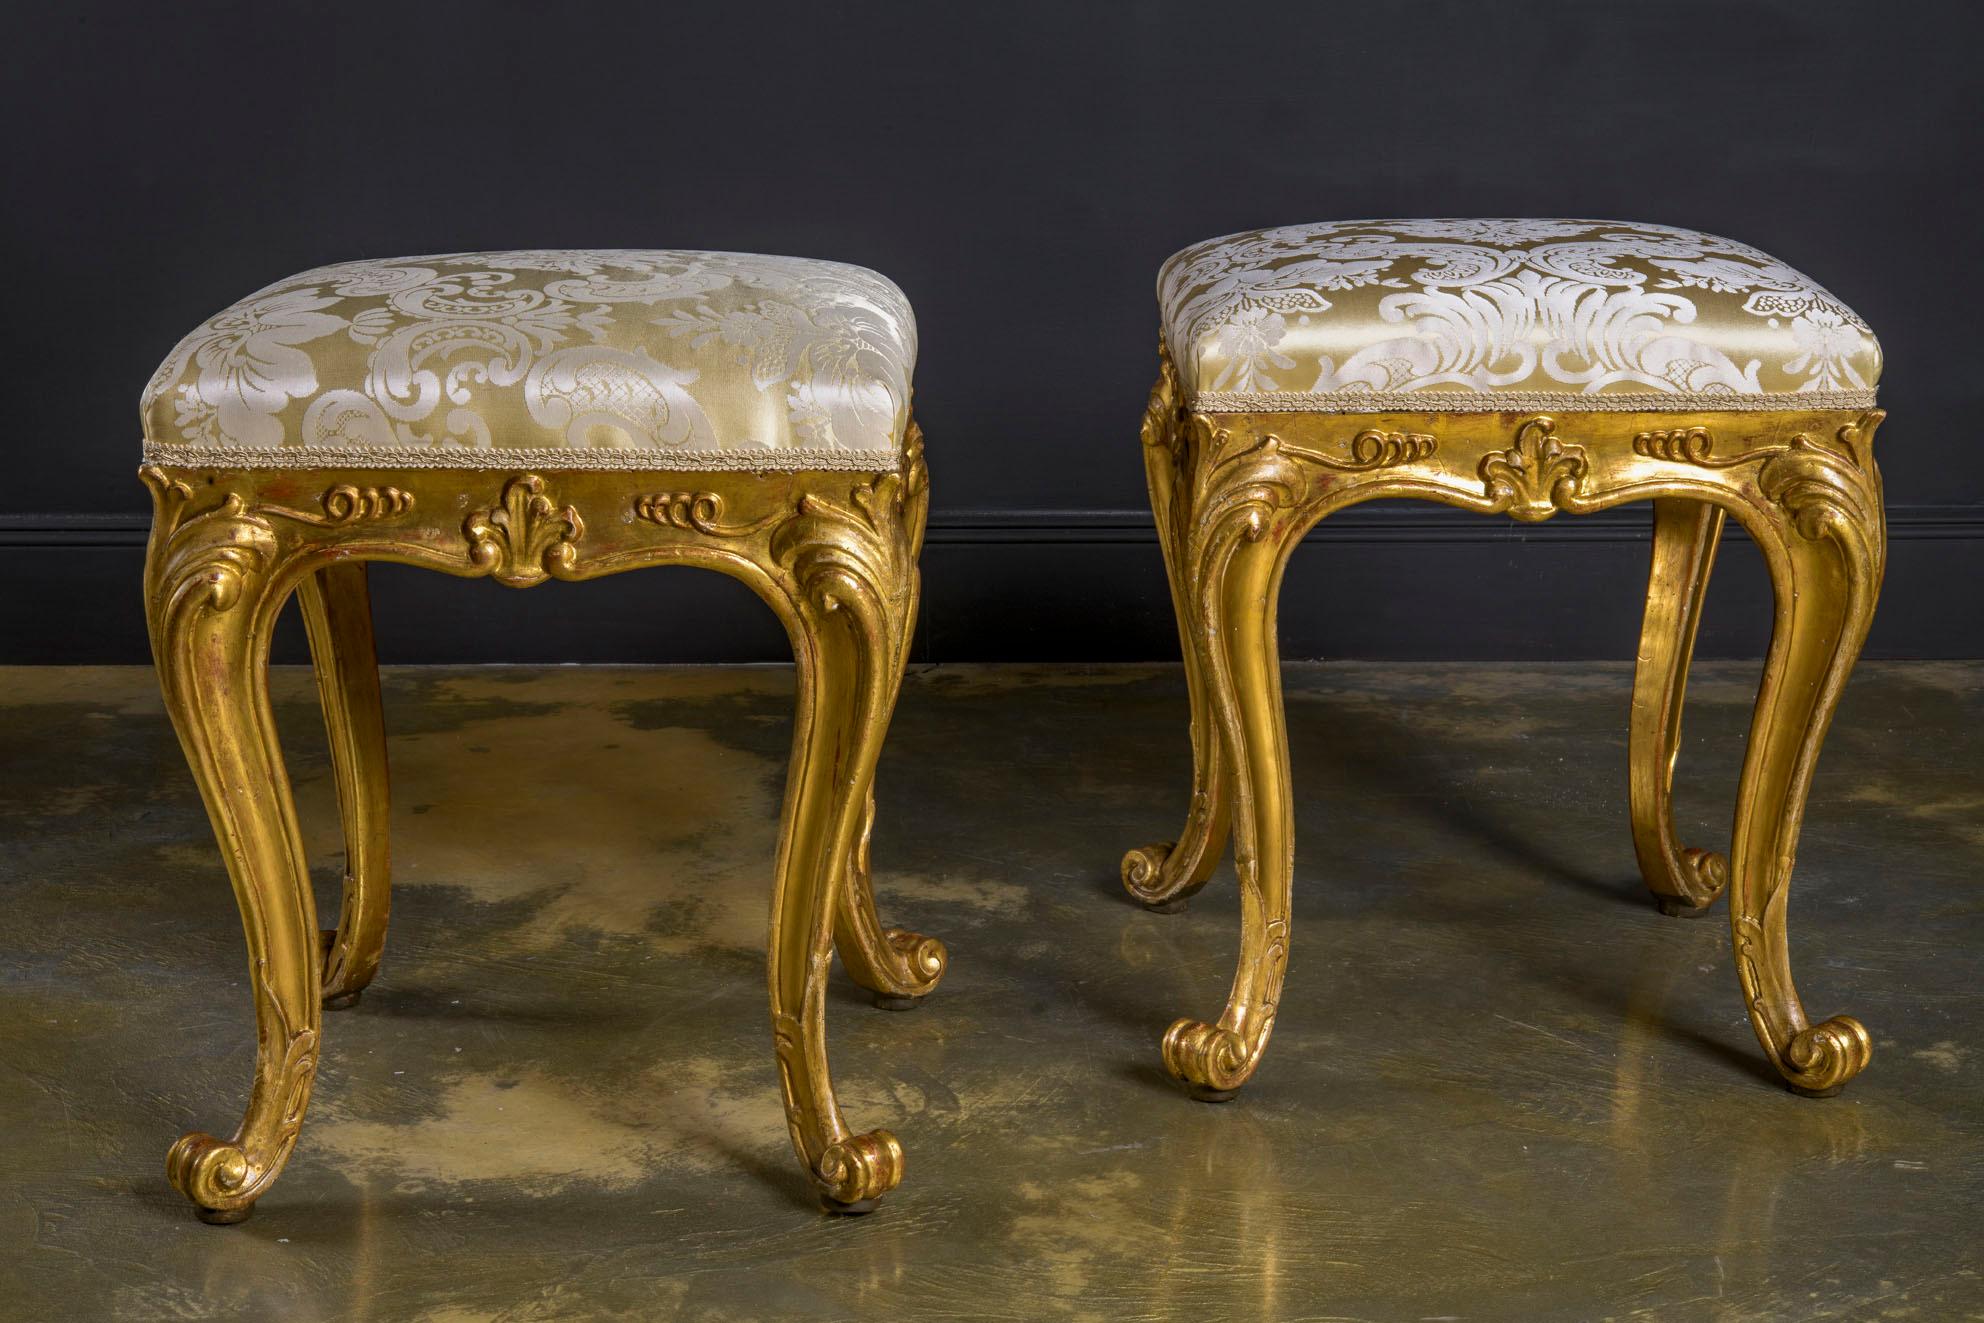 Stunning and elegant hand carved giltwood pair of benches, 19th century French Louis XV style created very probably by Maison Jansen. 
The very high quality and beauty of this work allow to be attributed to the celebrated French Maison